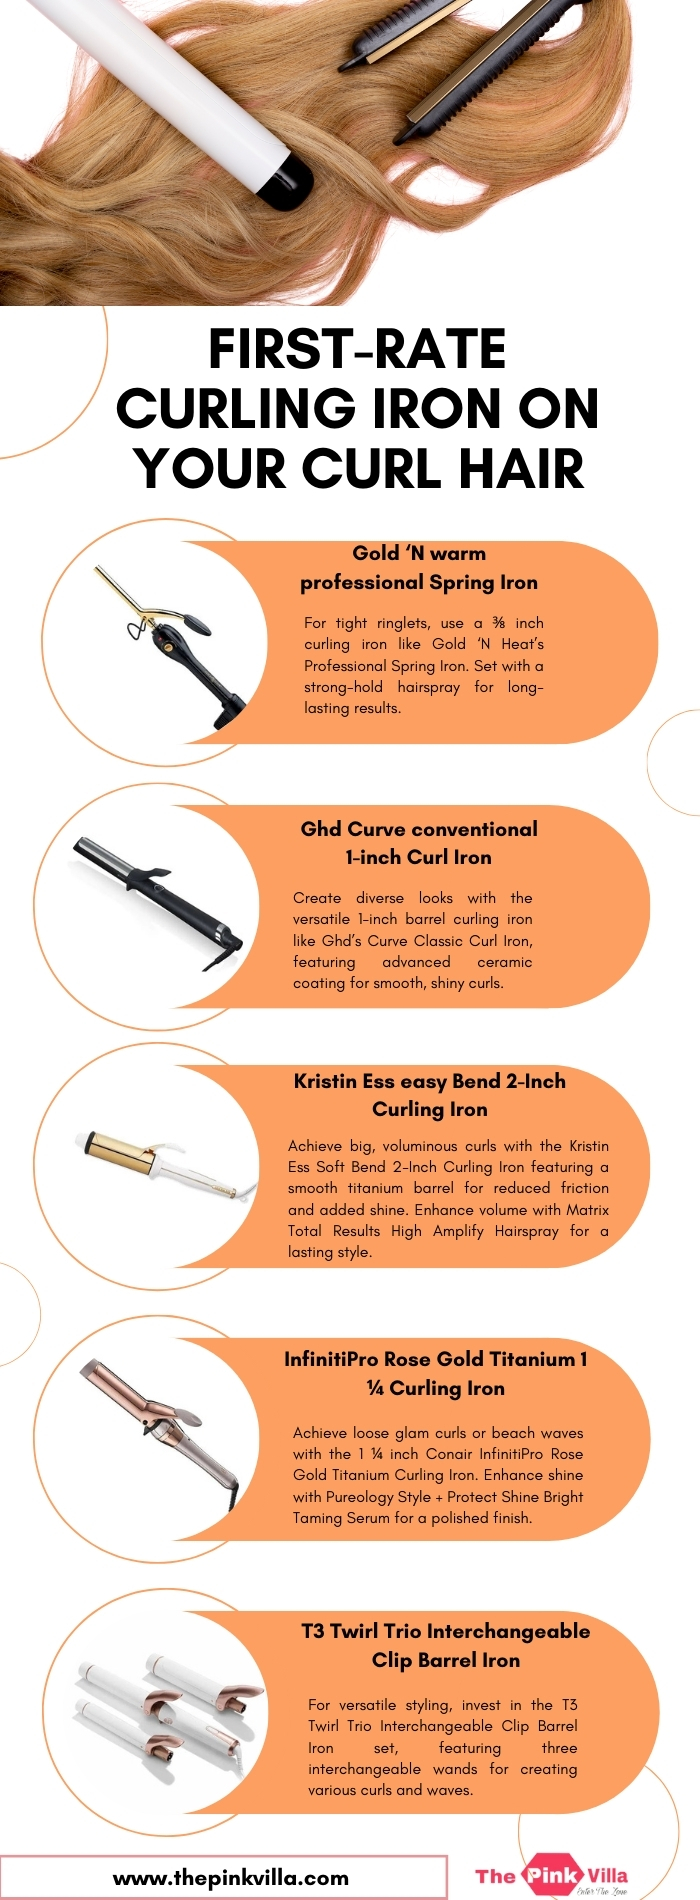 First-Rate Curling Iron On Your Curl Hair